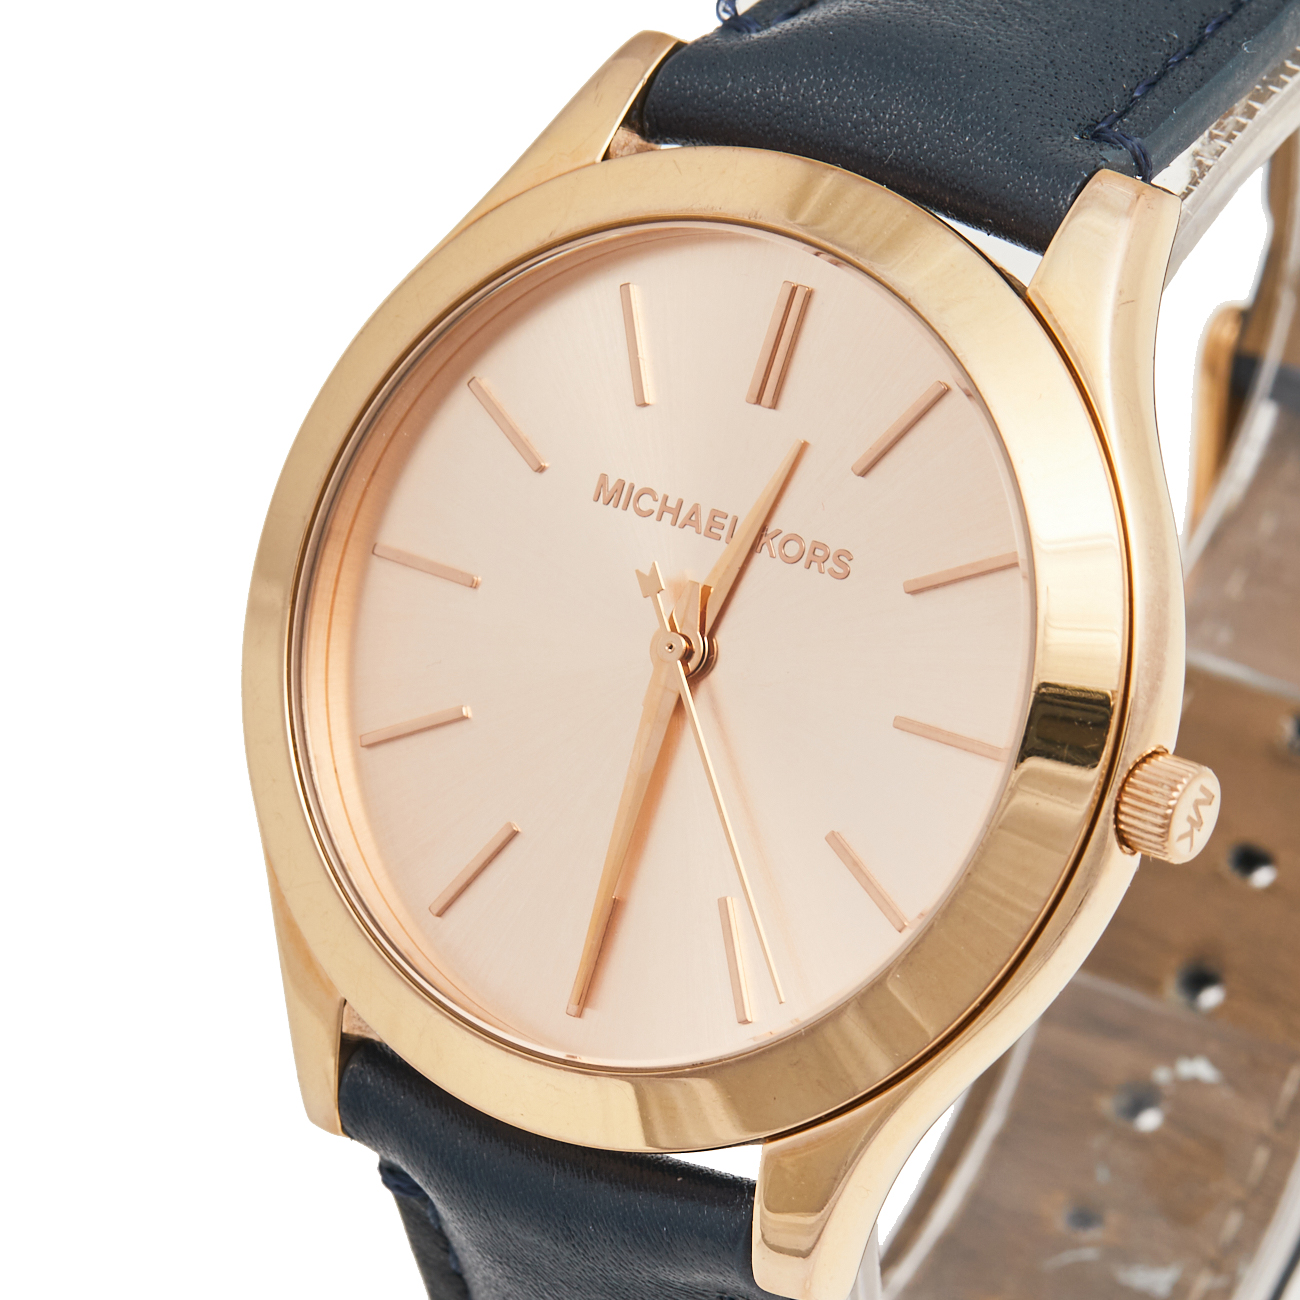 

Michael Kors Salmon Rose Gold Plated Stainless Steel Leather Slim Runway MK-2466 Women's Wristwatch